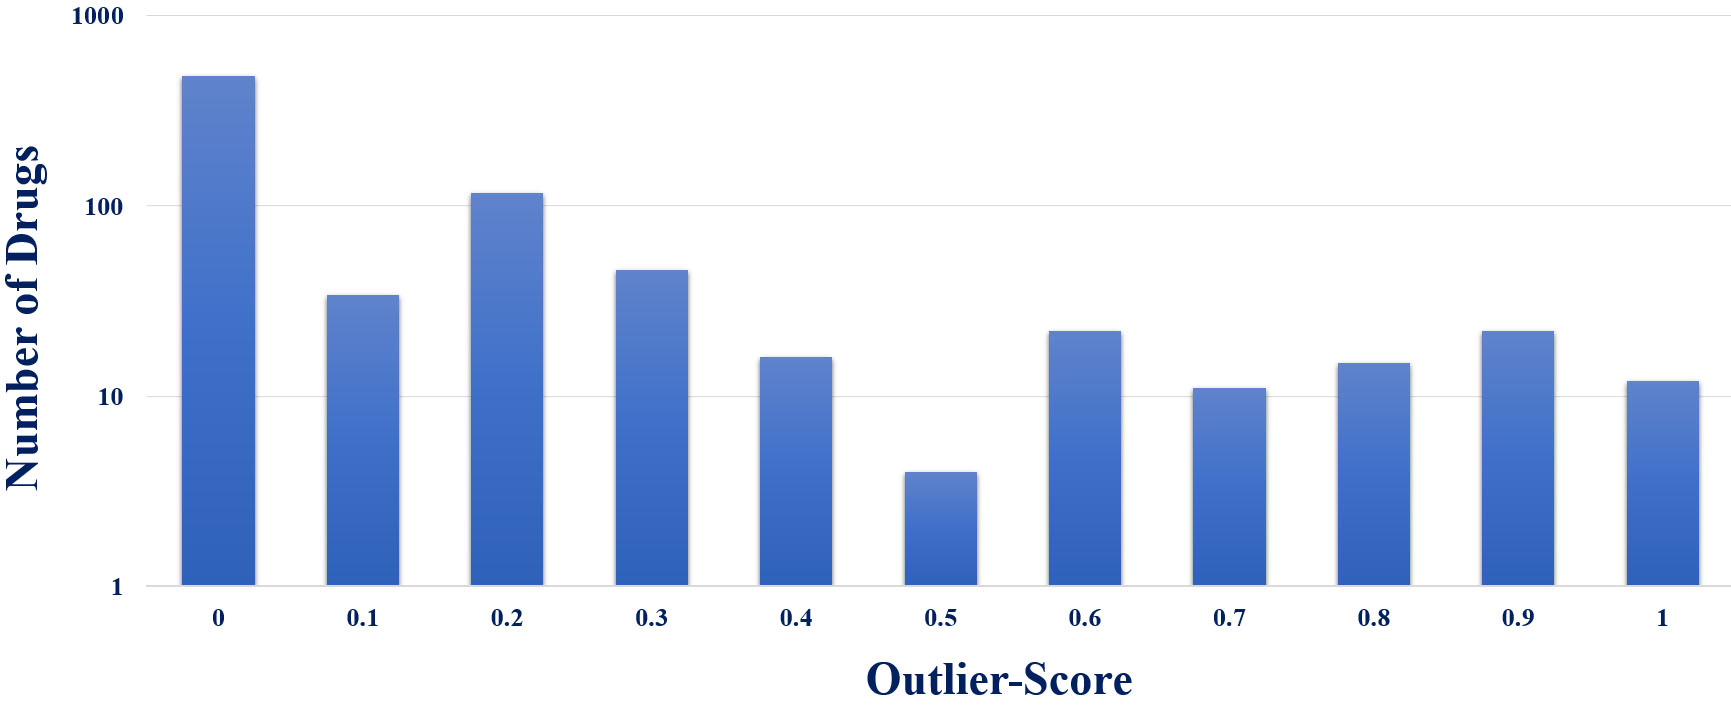 Number of drugs for different values of outlier score.